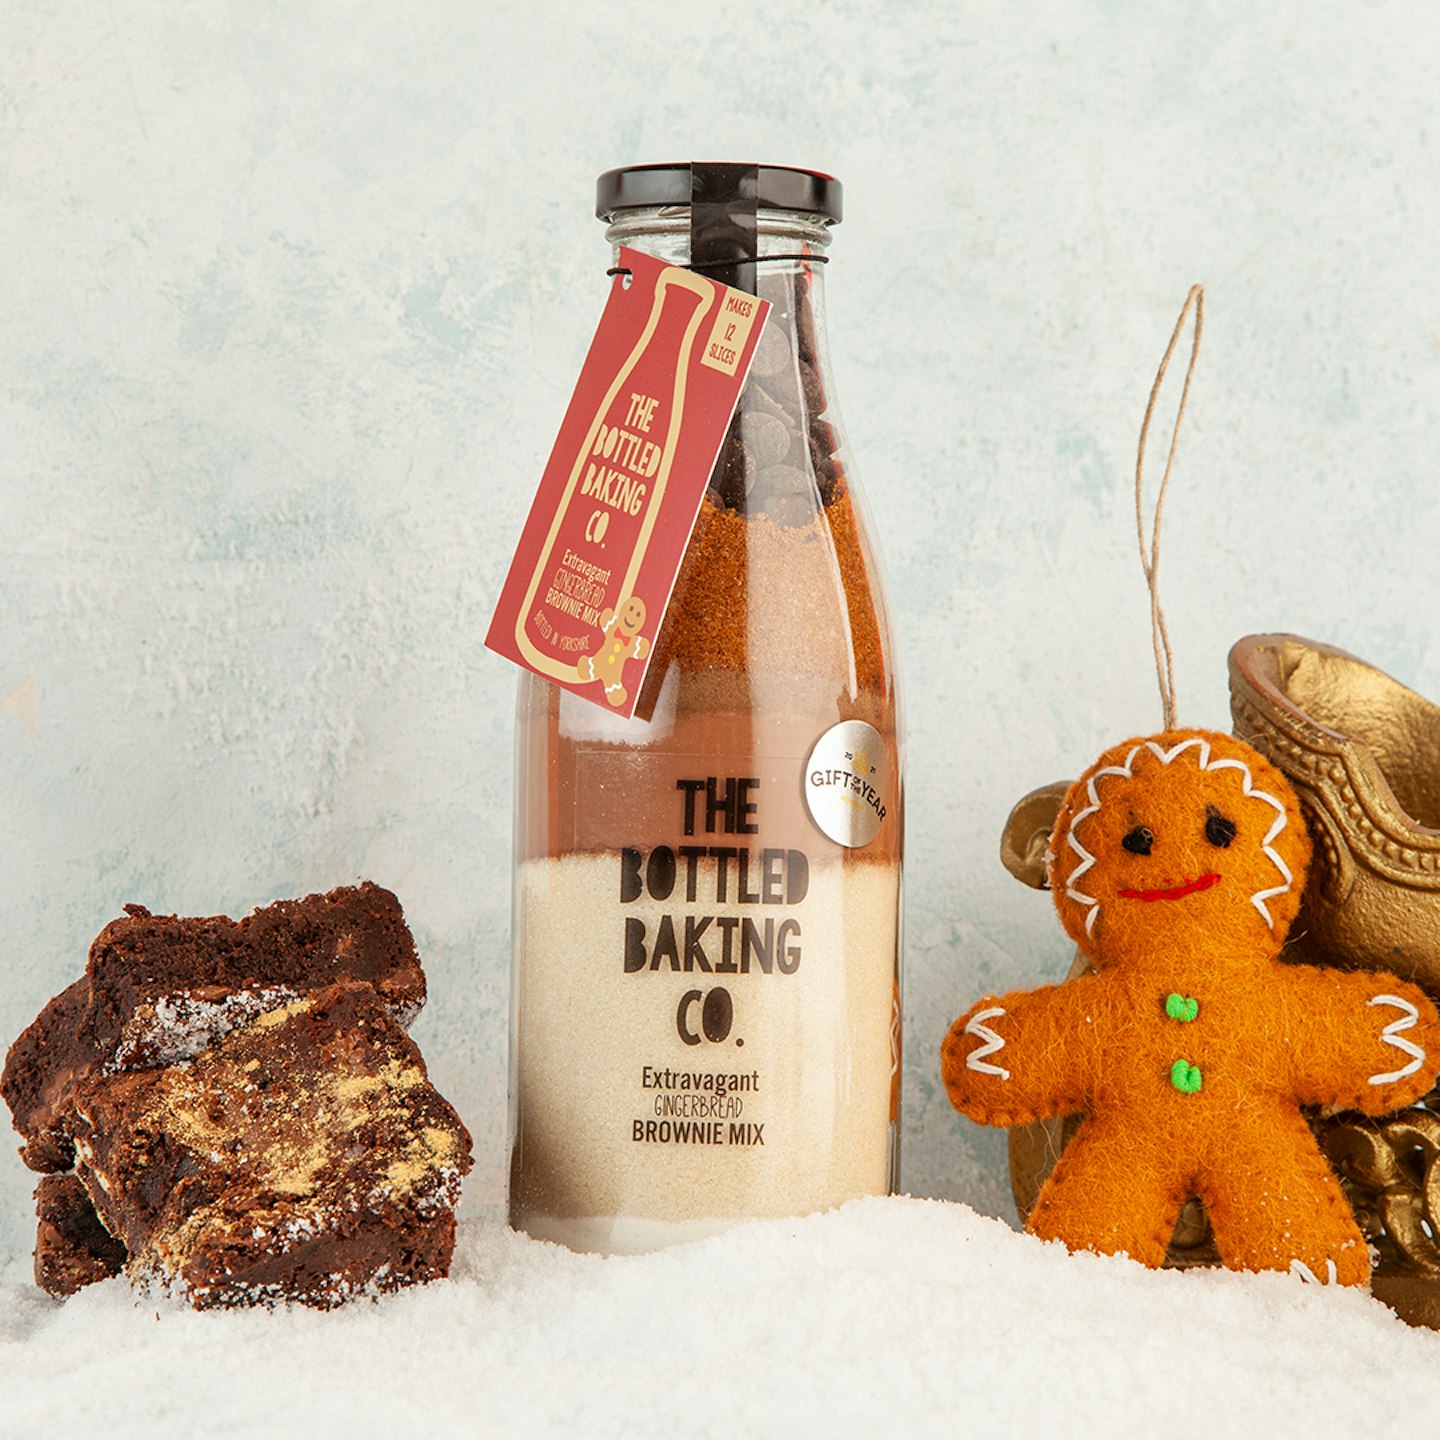 Extravagant Gingerbread Brownie mix in a Bottle